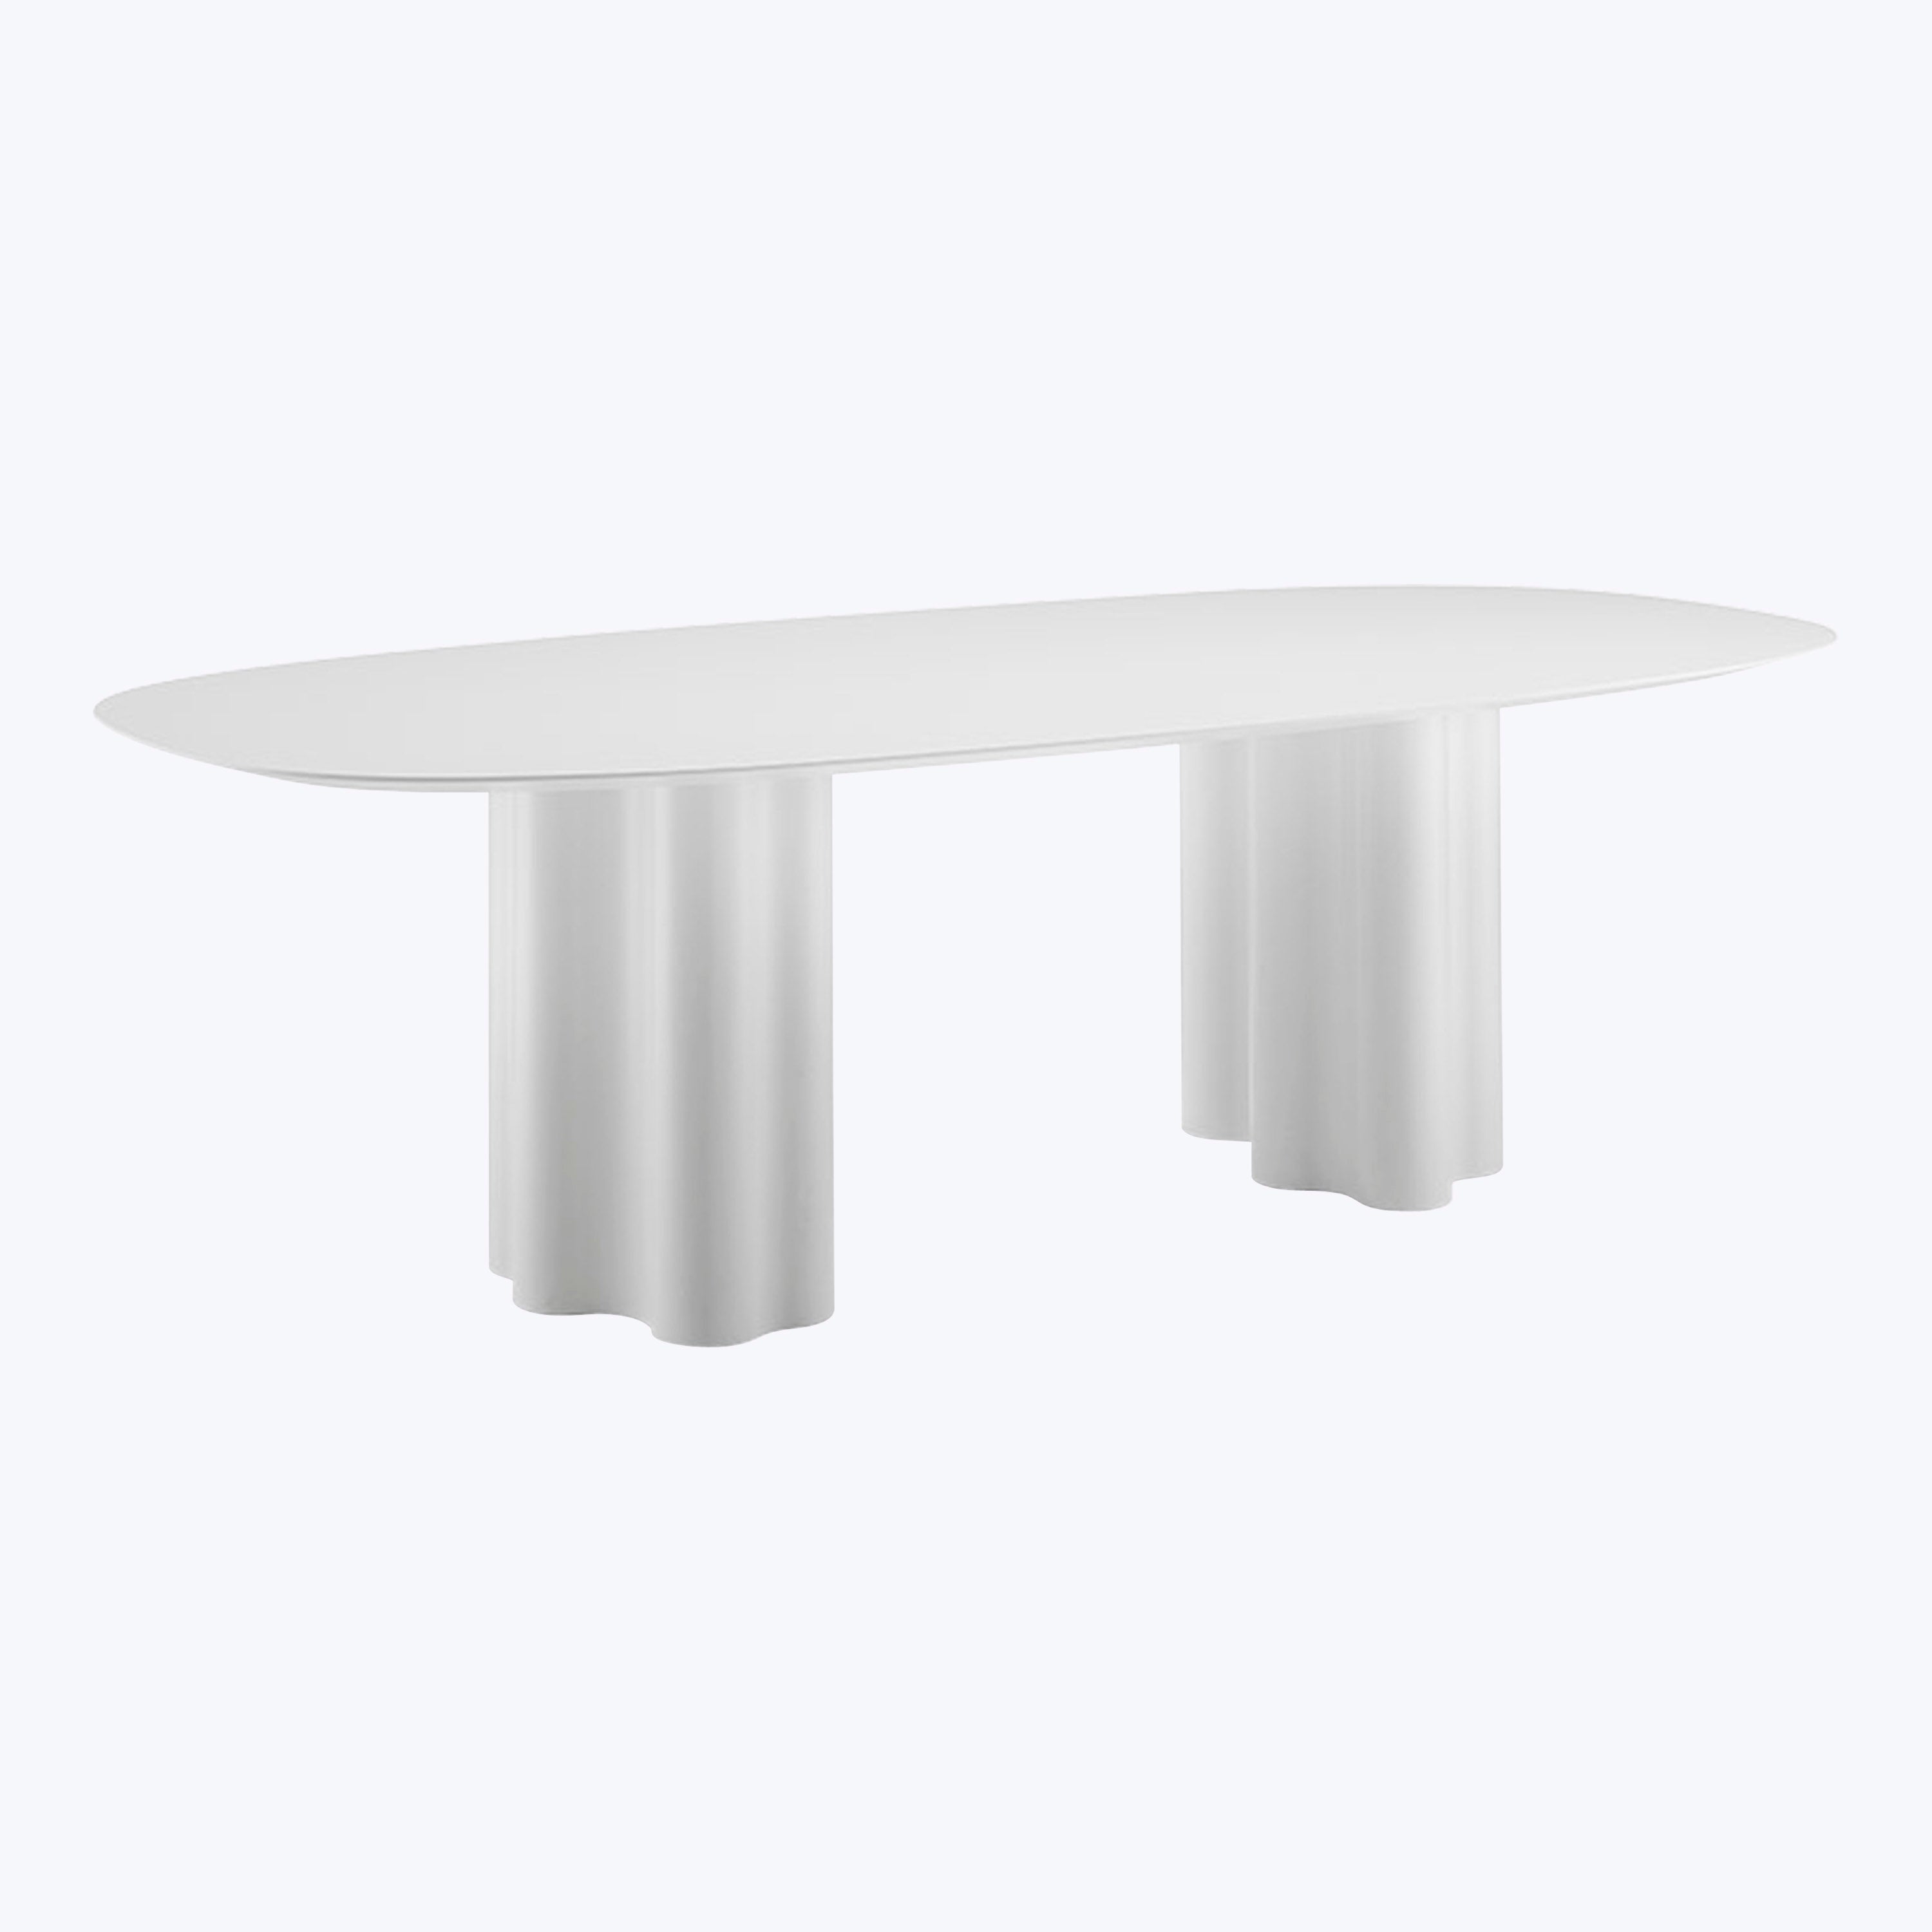 Teatro Magico Oval Dining Table